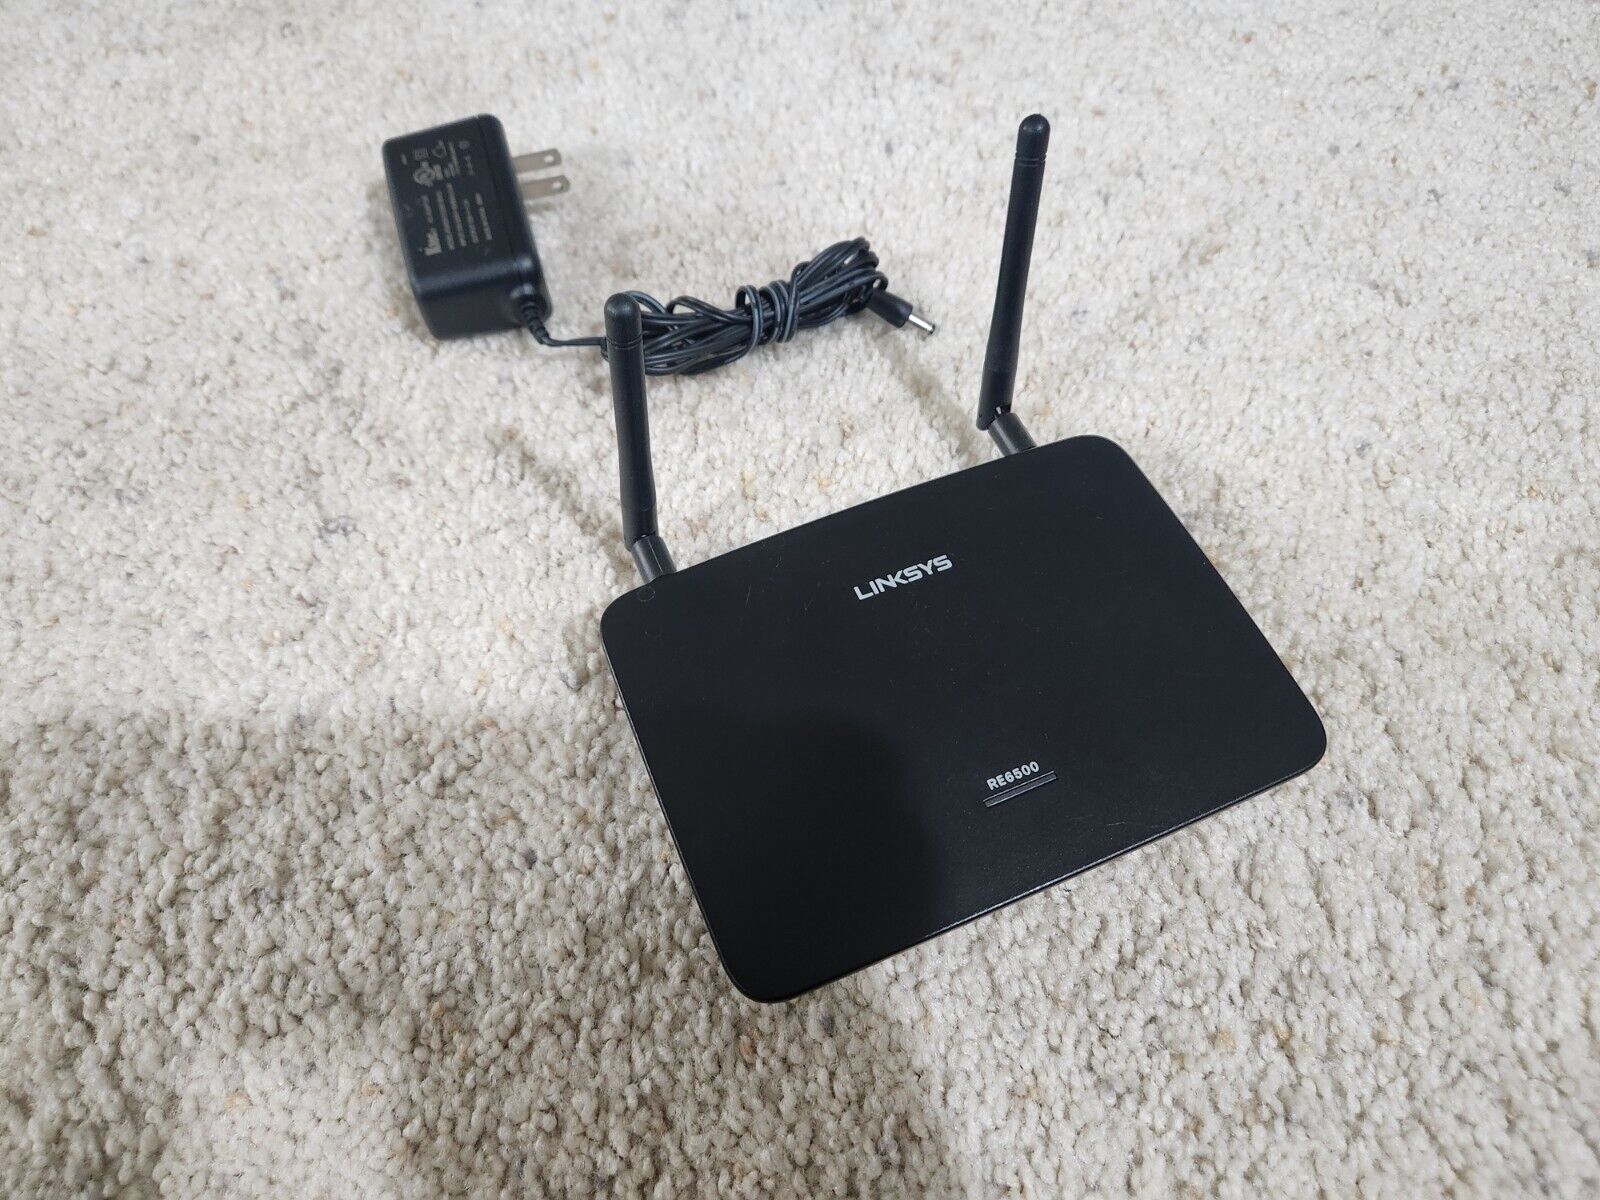 Linksys RE6500 AC1200 Dual Band Wi-Fi Range Extender with Power Adaptor